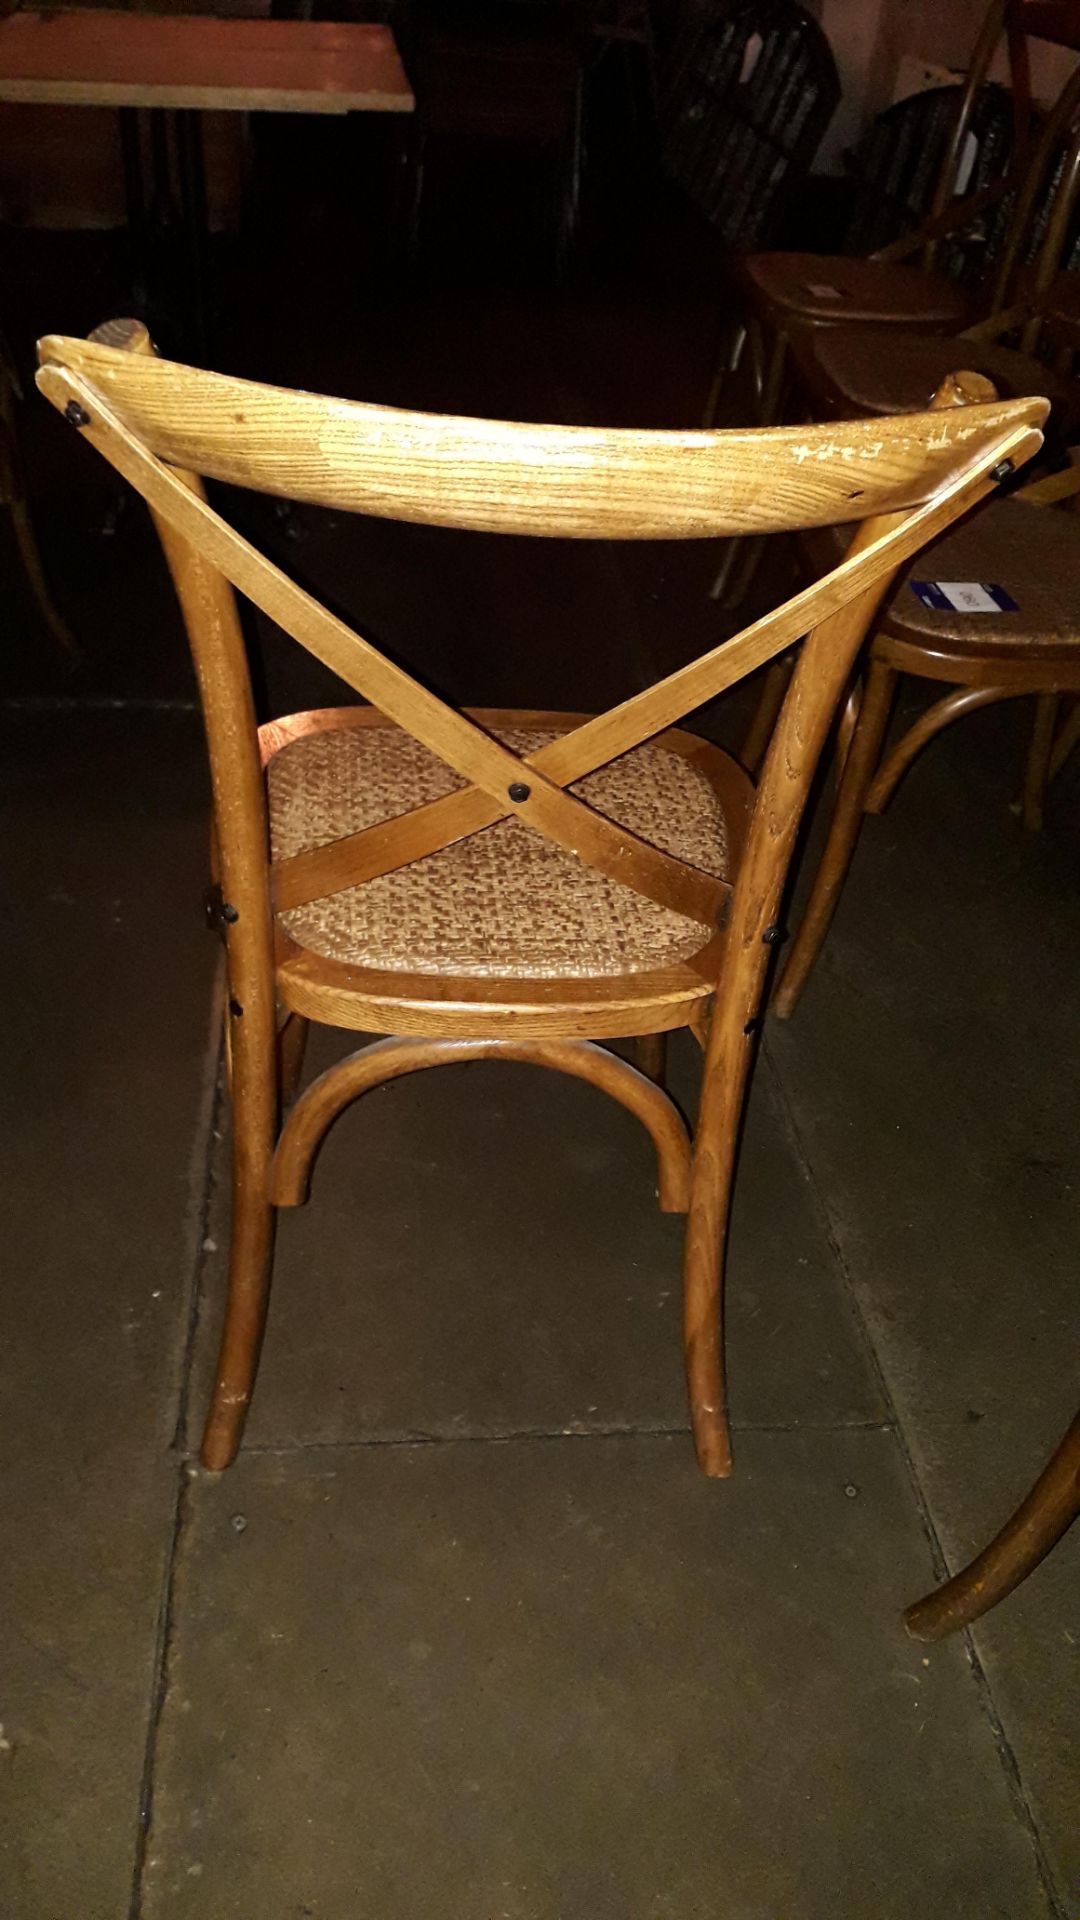 4 x Bent Wood Dining Chairs with Drop In Rattan Seats - Image 2 of 2